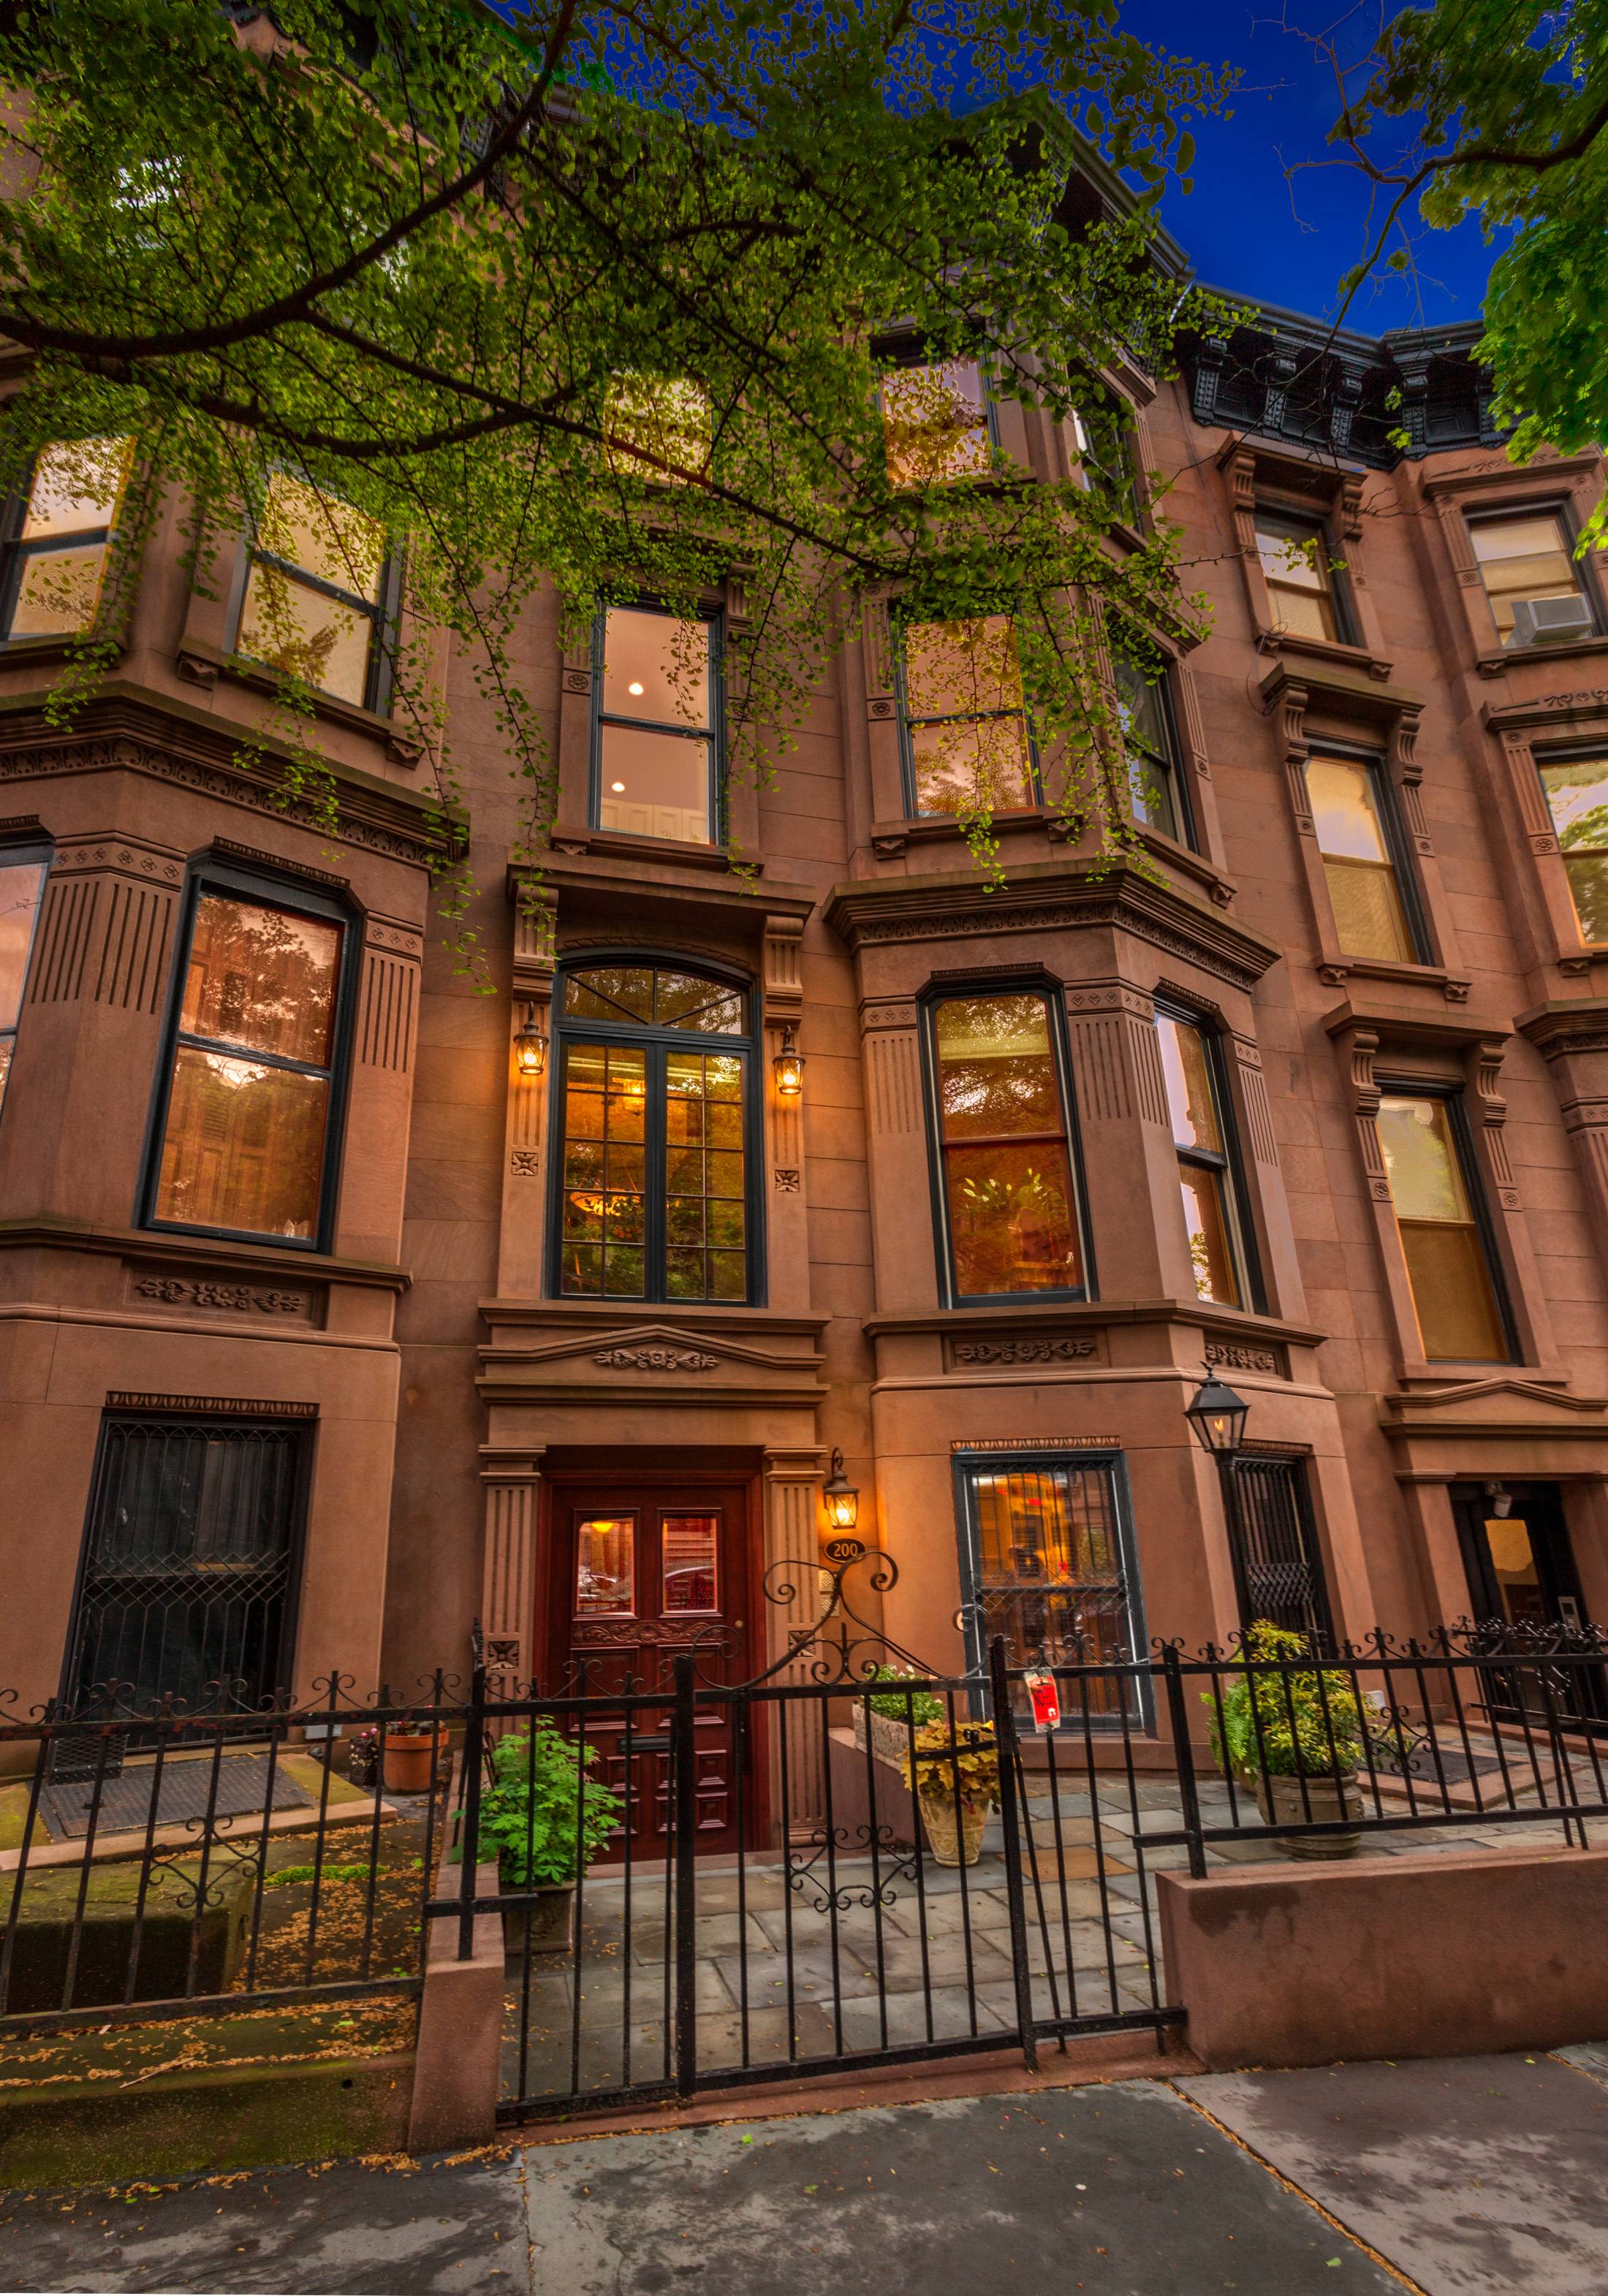 This exquisite 20' x 50' brownstone is located on one of Park Slope's prime blocks built in 1884 and just moments from Prospect Park and Grand Army Plaza with its ...